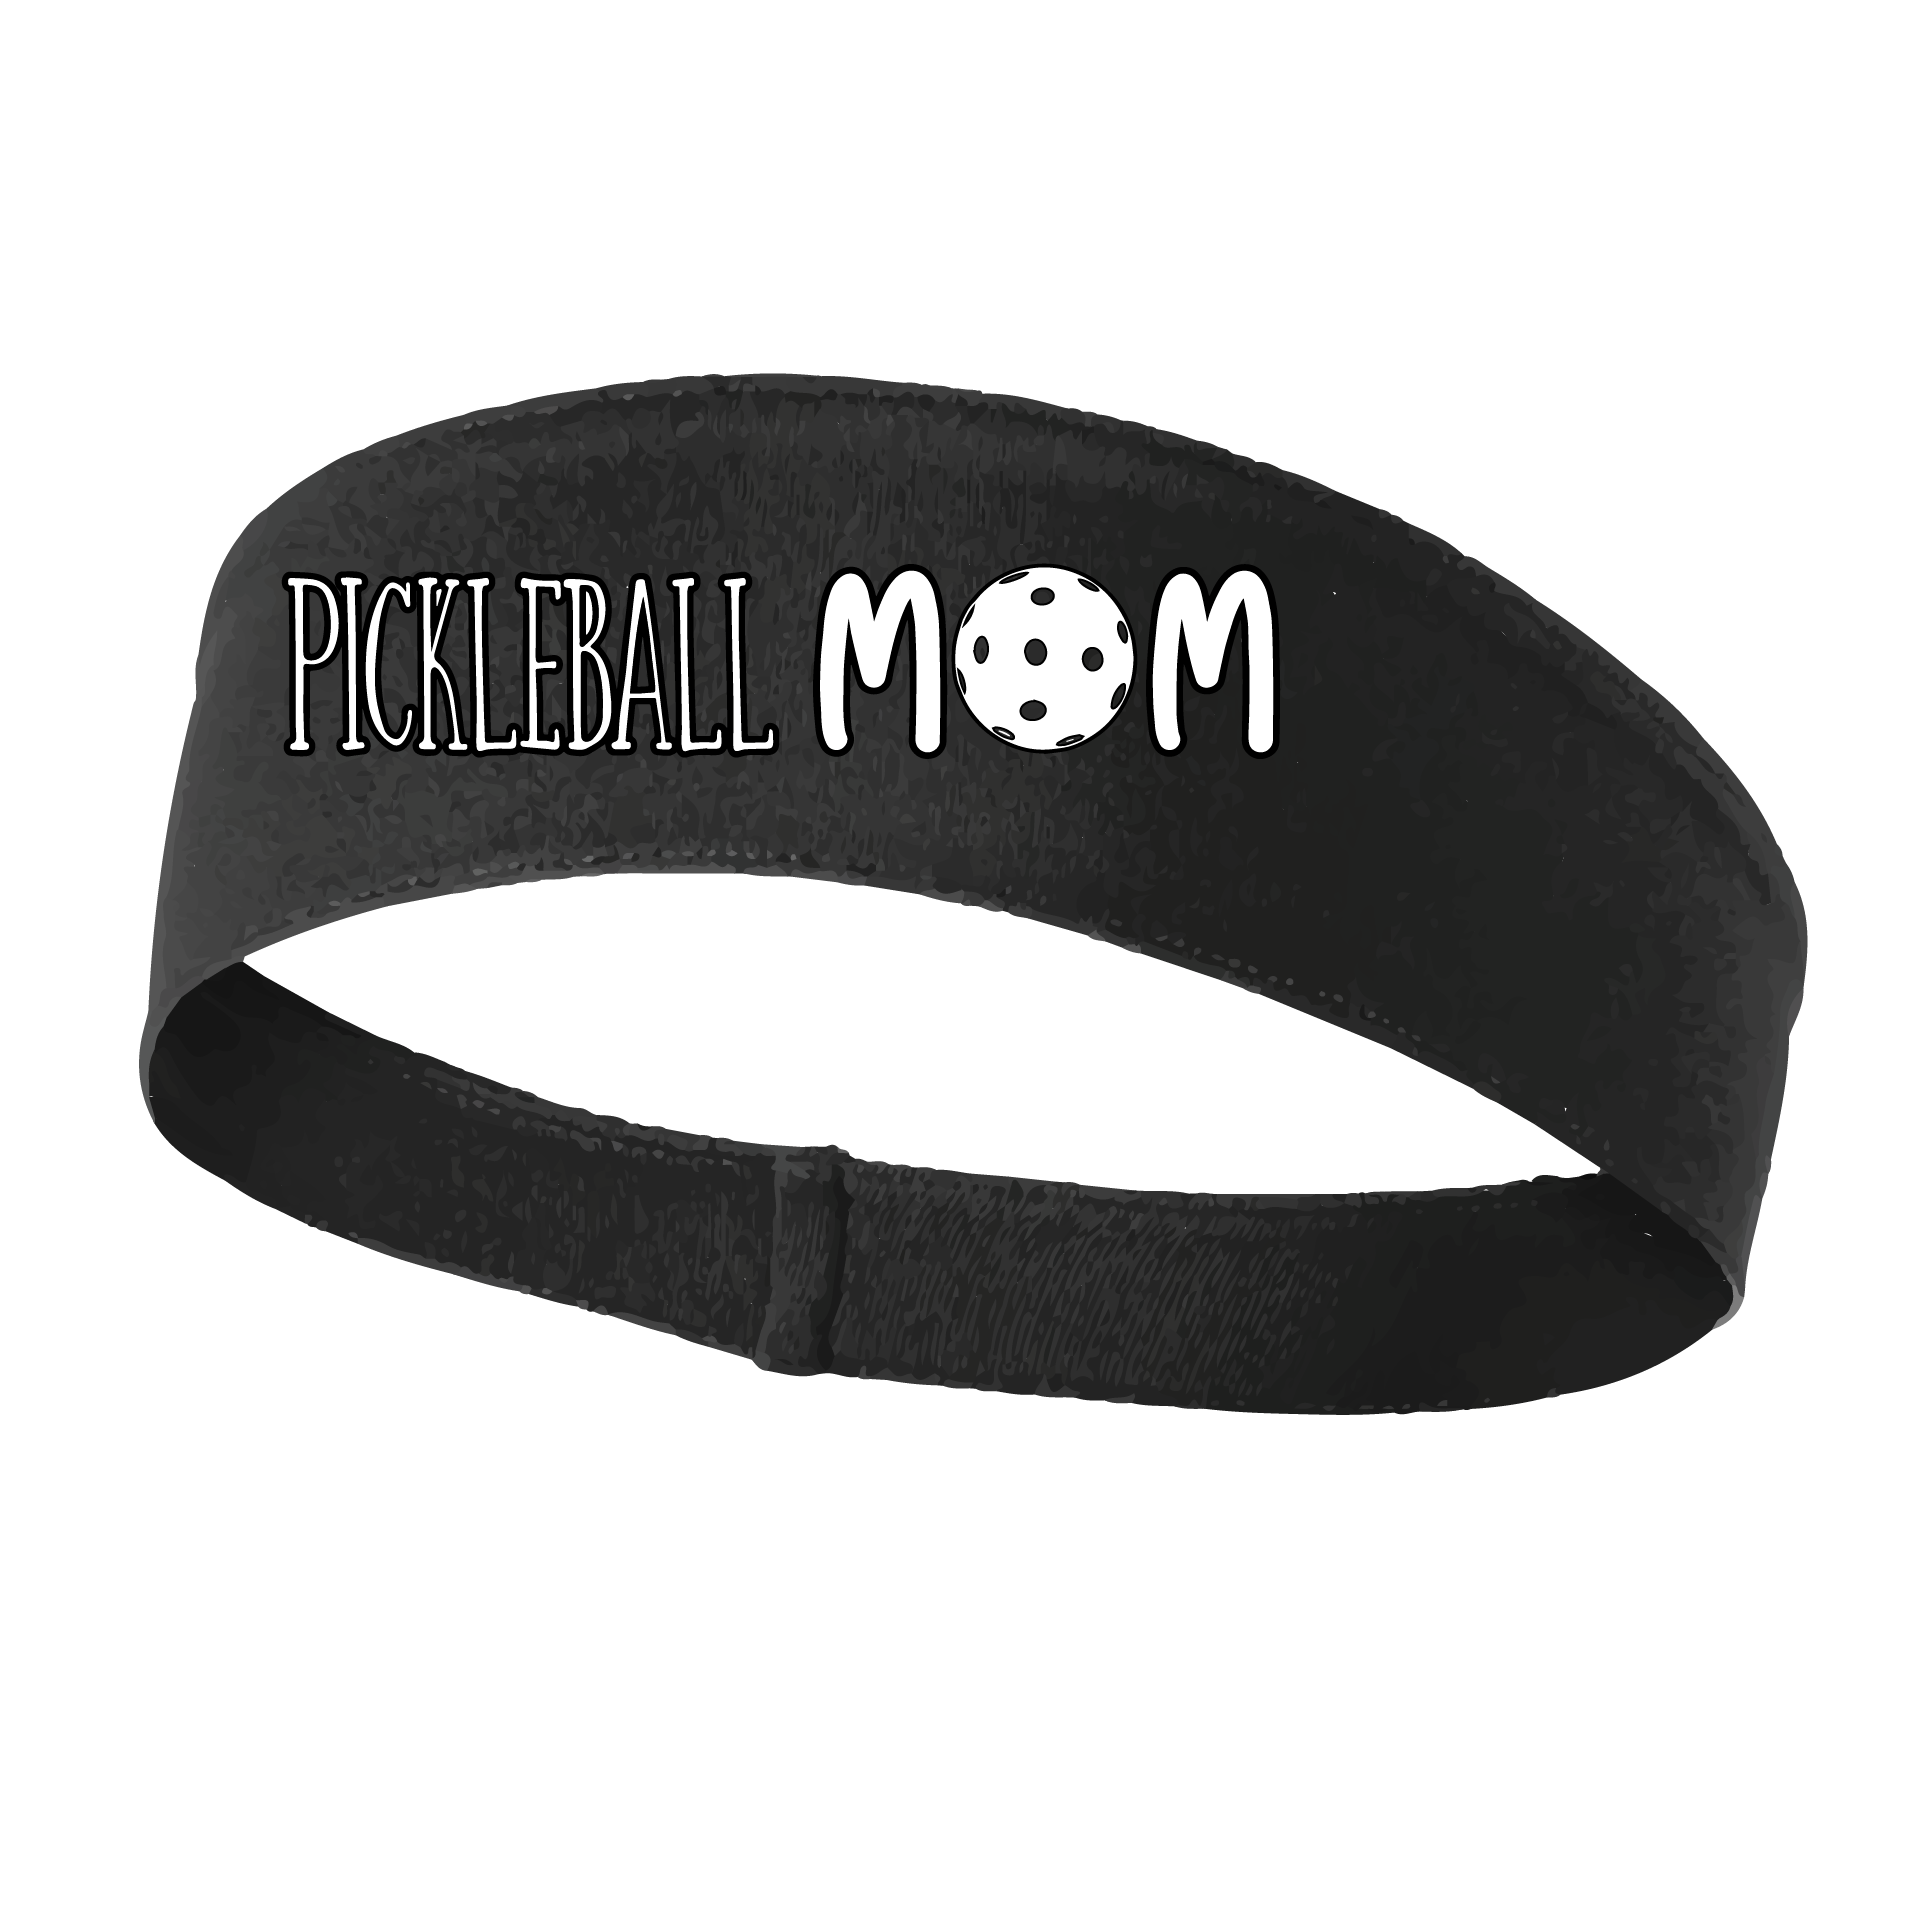 Pickleball Headband Design: Pickleball Mom  This fun, pickleball designed, moisture-wicking headband narrows in the back to fit more securely. Single-needle top-stitched edging. These headbands come in a variety of colors. Truly shows your love for the sport of pickleball!!